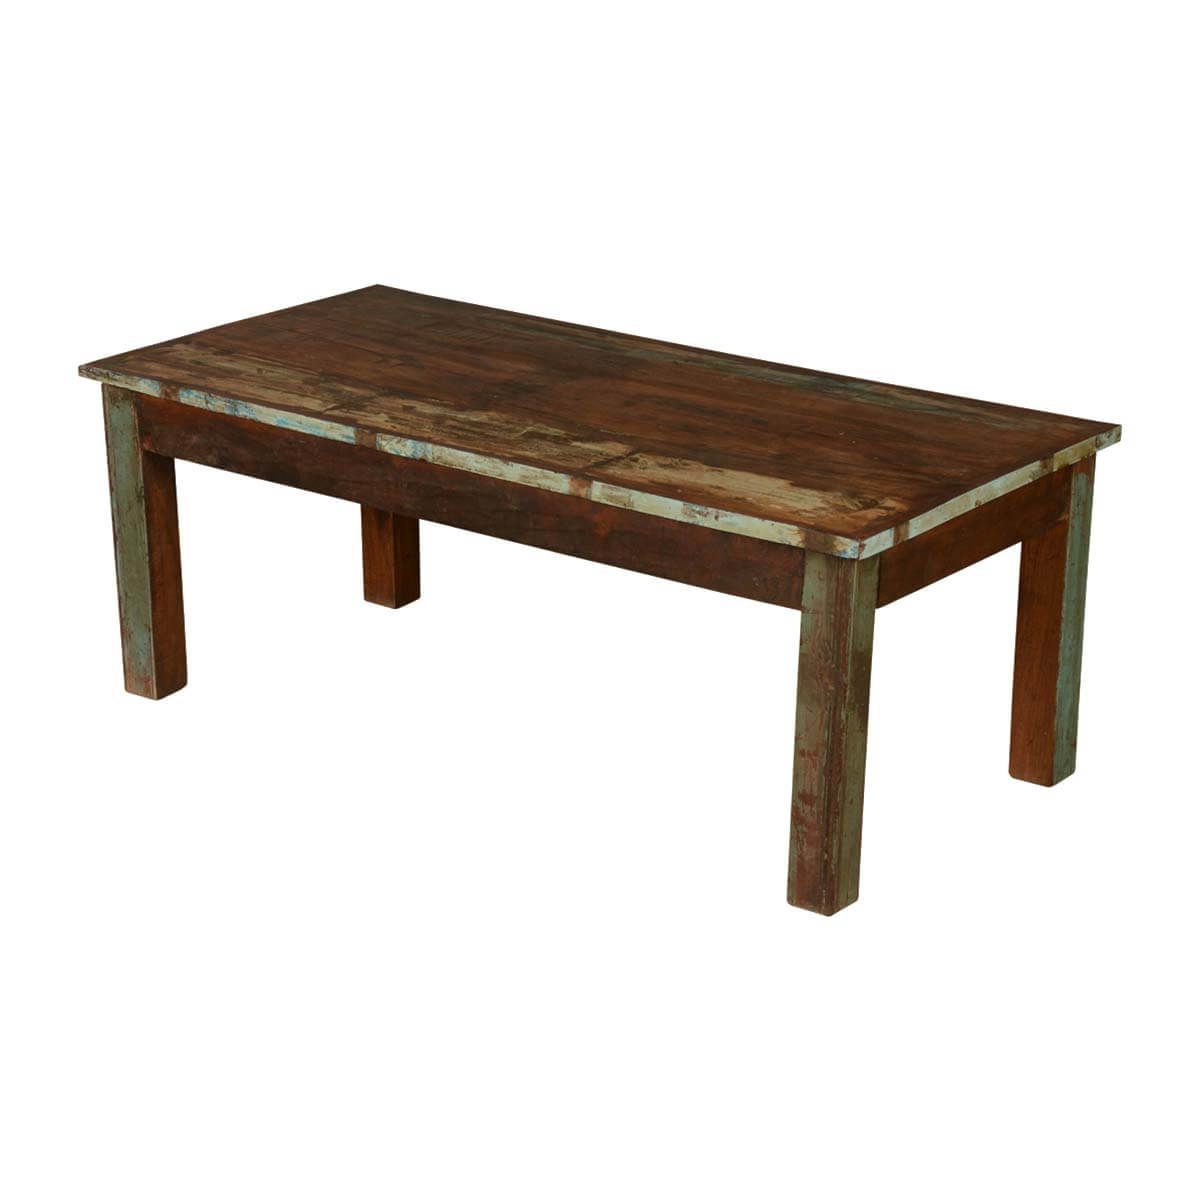 Farmhouse Distressed Reclaimed Wood Rustic Coffee Table Intended For Current Square Weathered White Wood Coffee Tables (View 5 of 20)